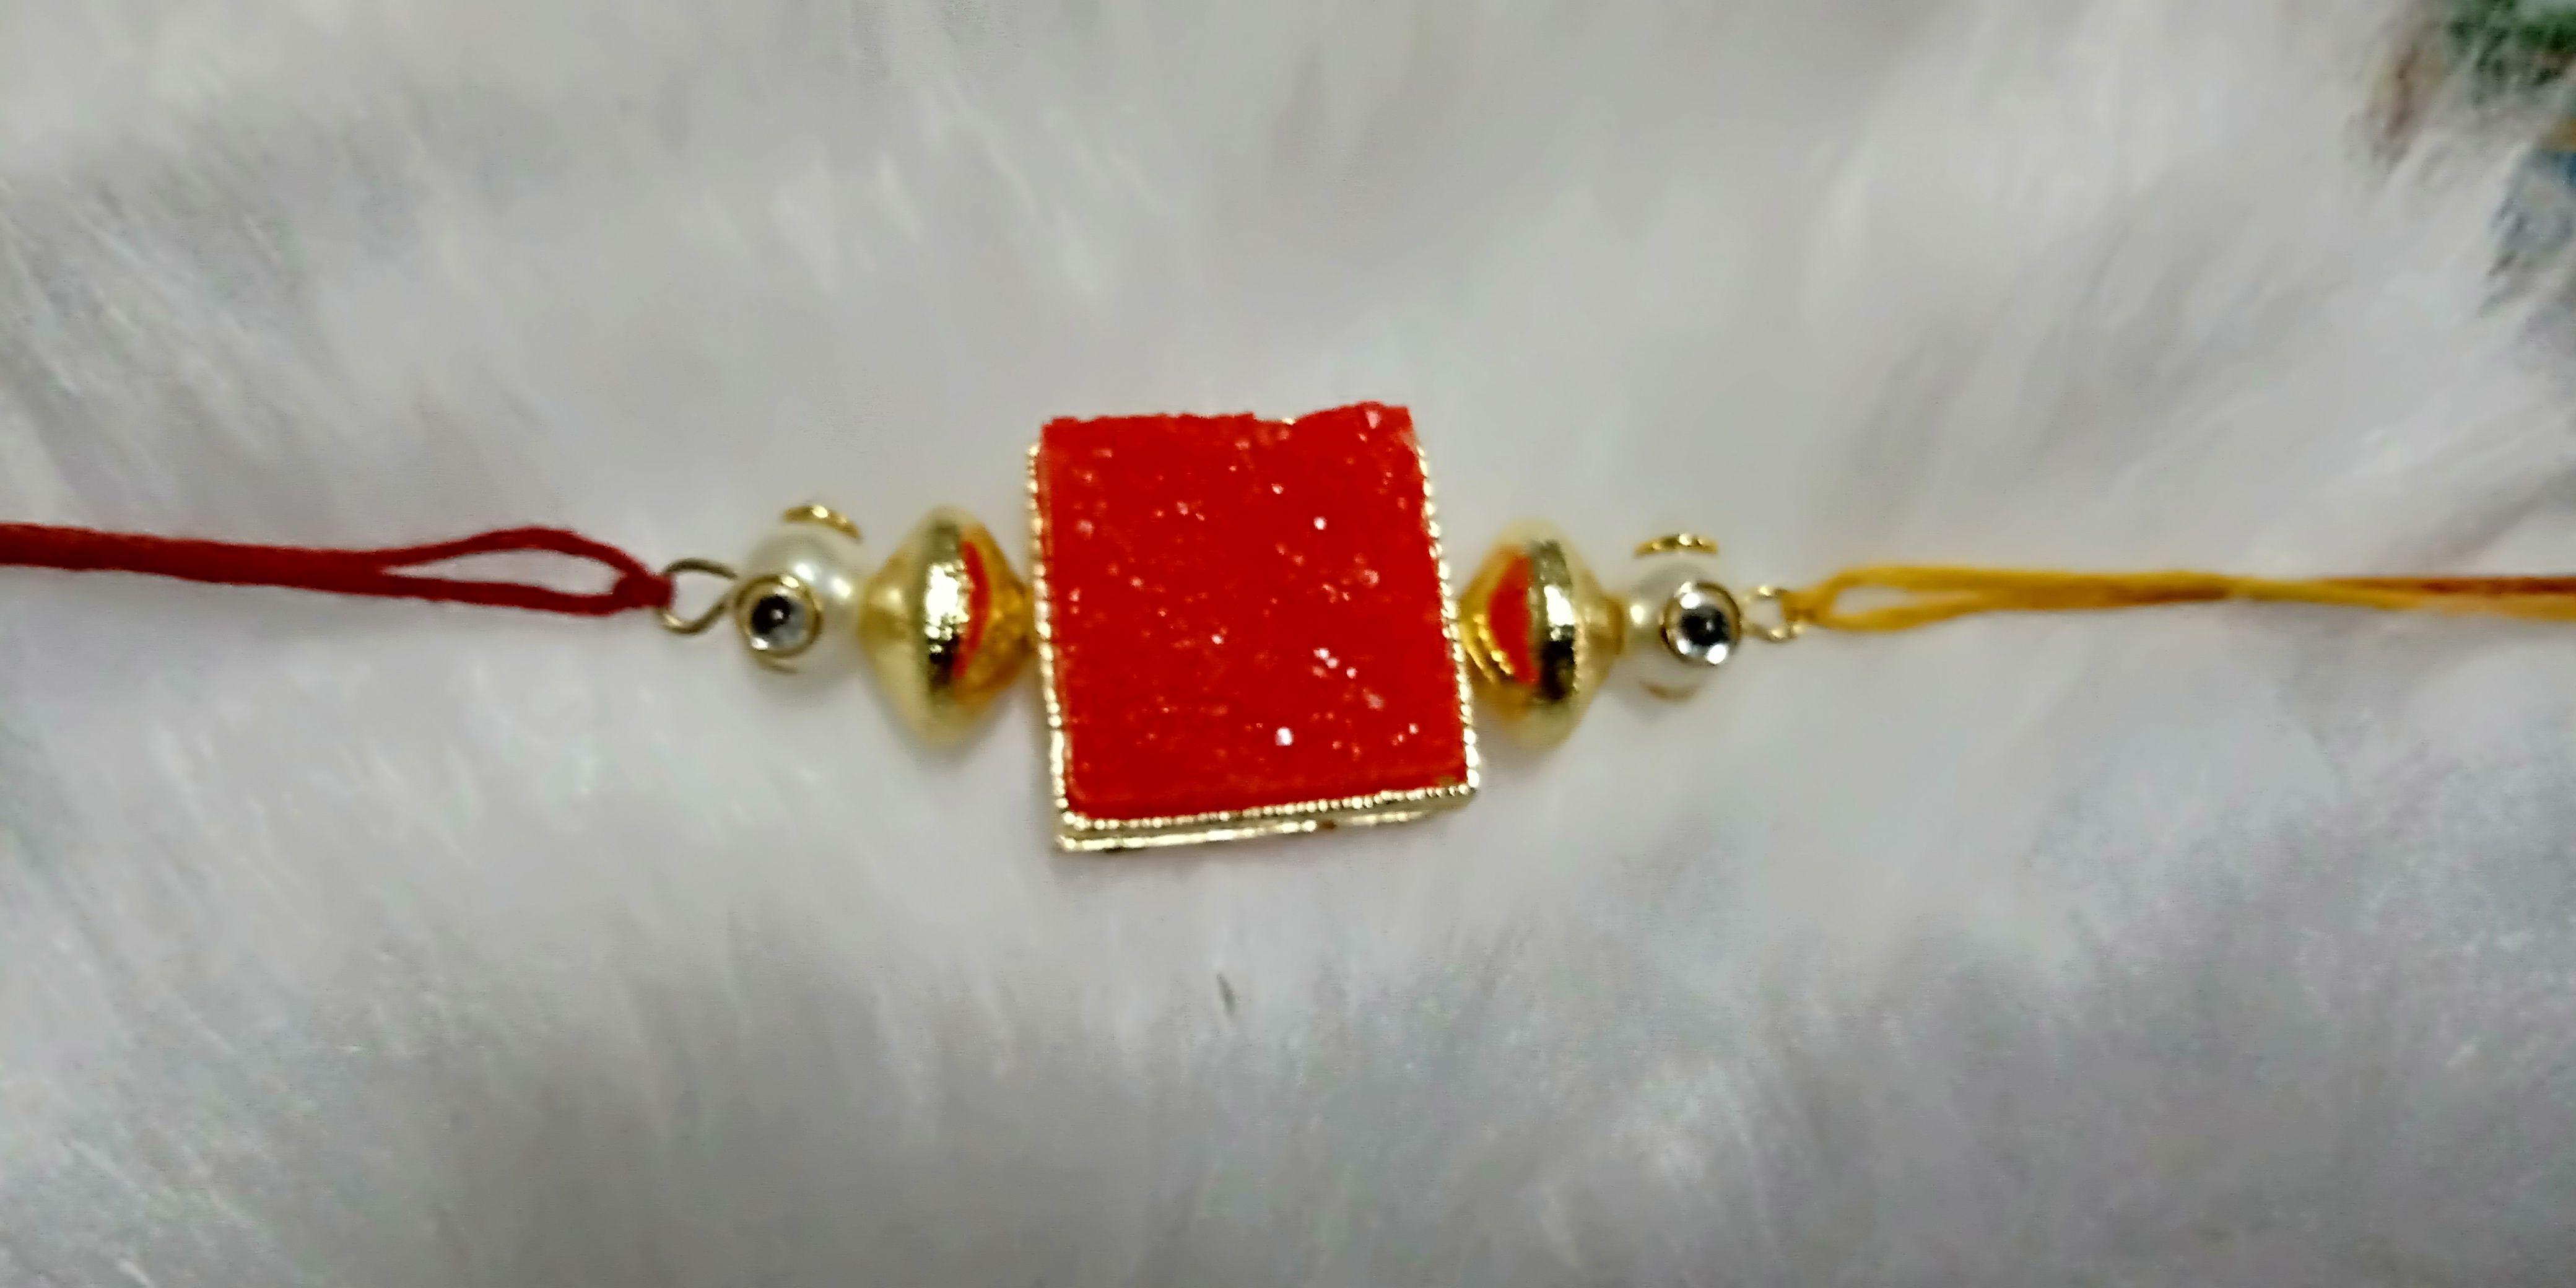 Red Square with White Oval Logo - Pretty Red Square Piece with Golden Oval Brush Finished Beads